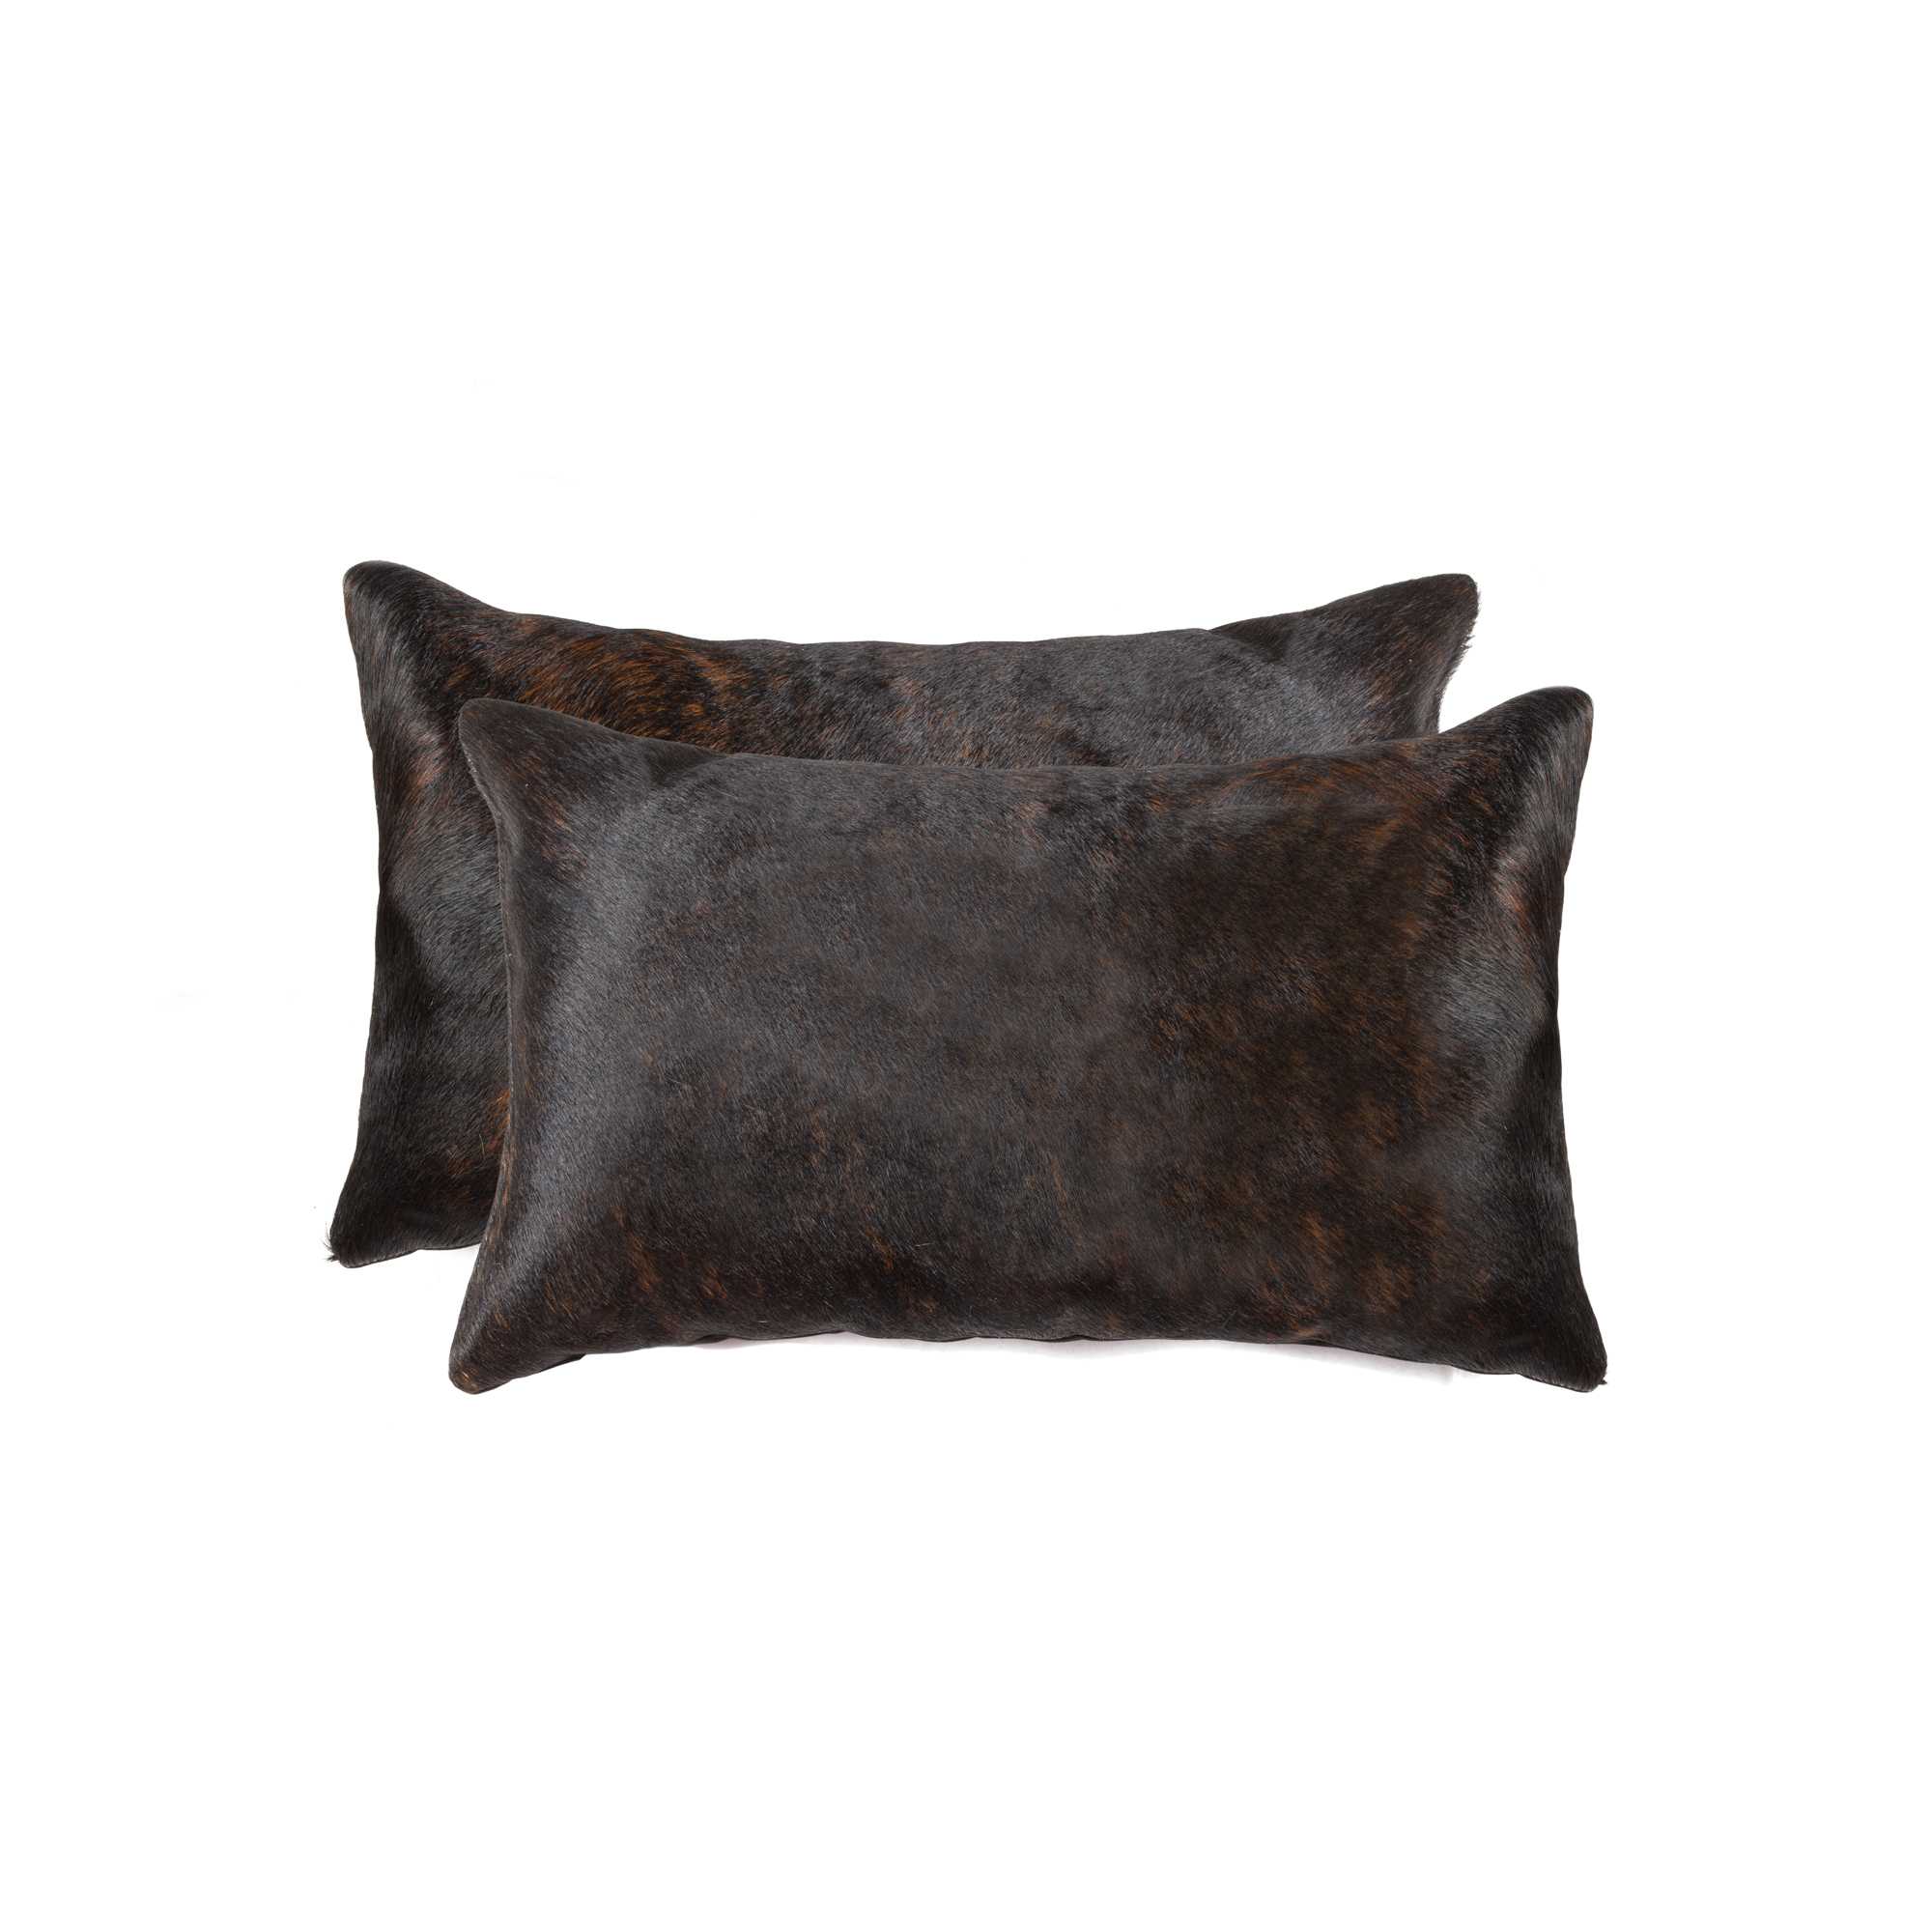 12" x 20" x 5" Chocolate, Cowhide - Pillow 2-Pack